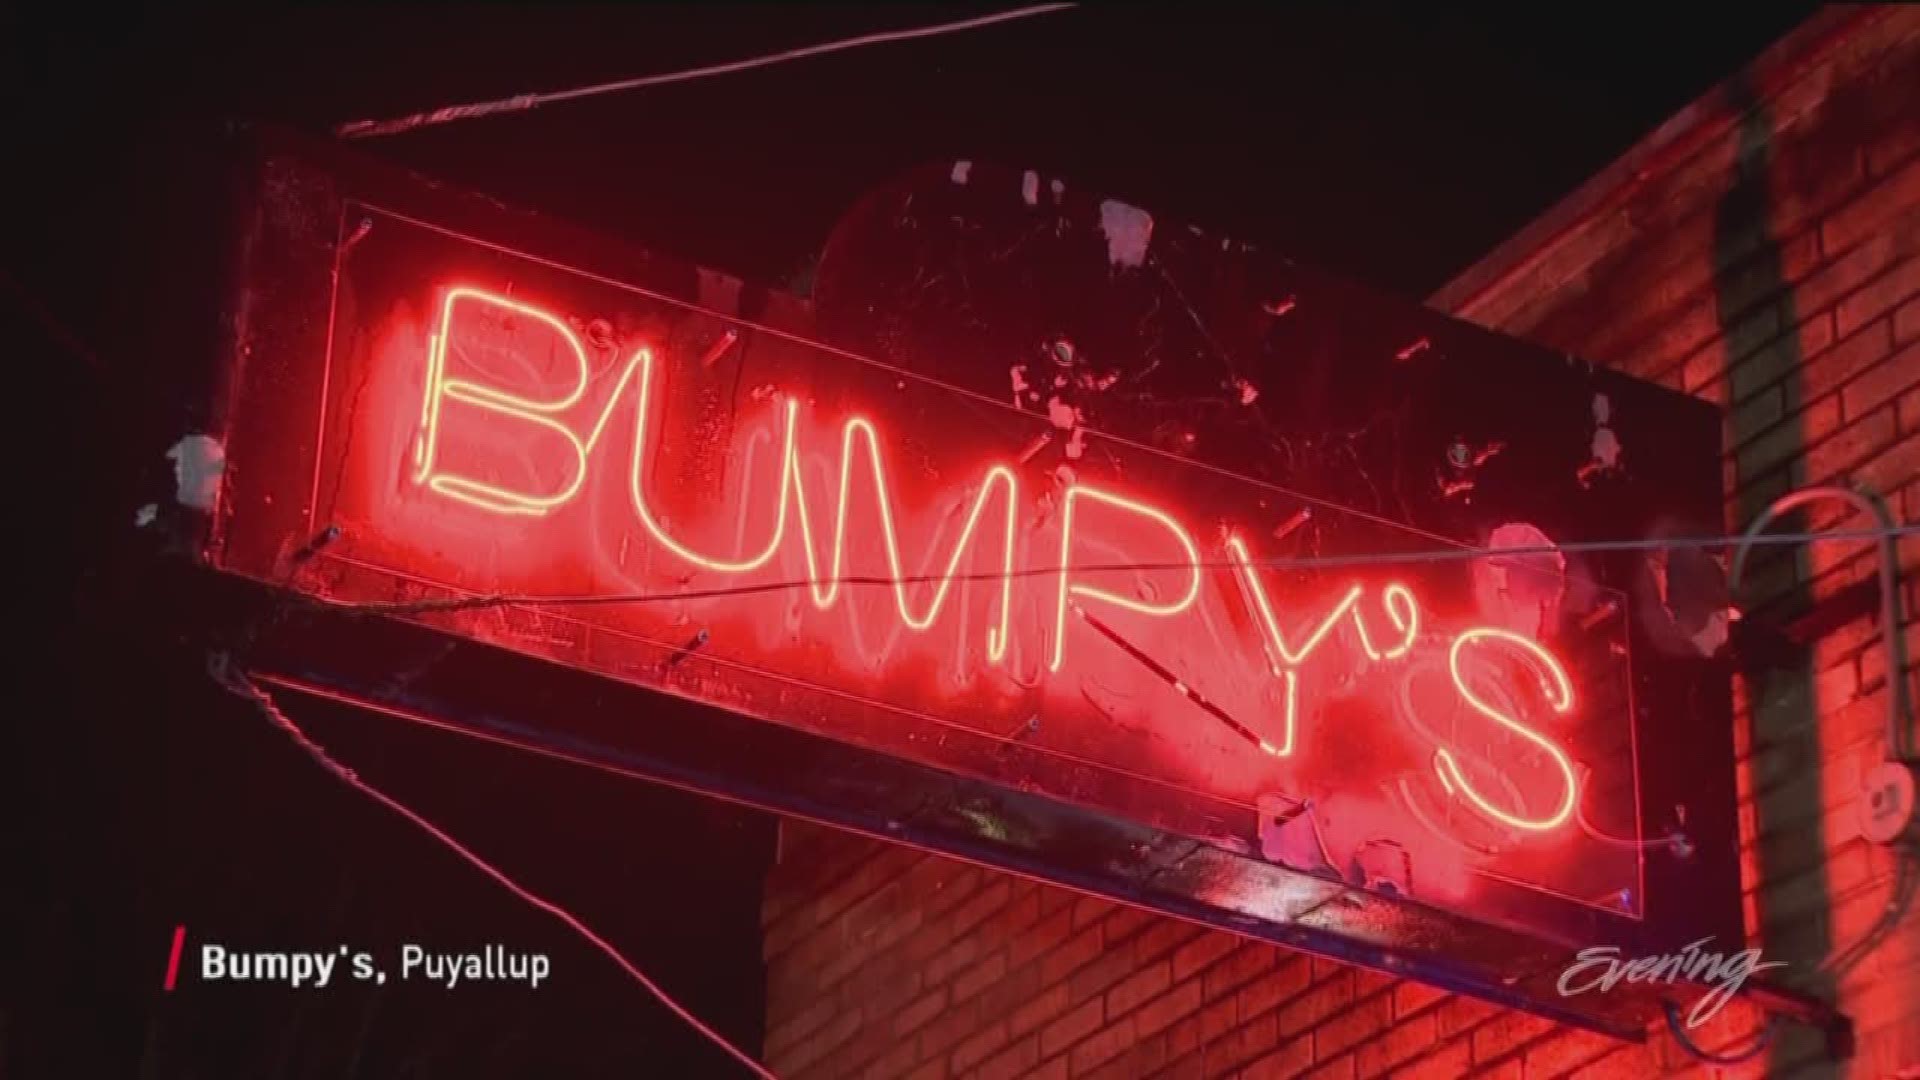 Daily food and drink specials, friendly folks, and a cozy vibe make Bumpy's a favorite neighborhood spot.